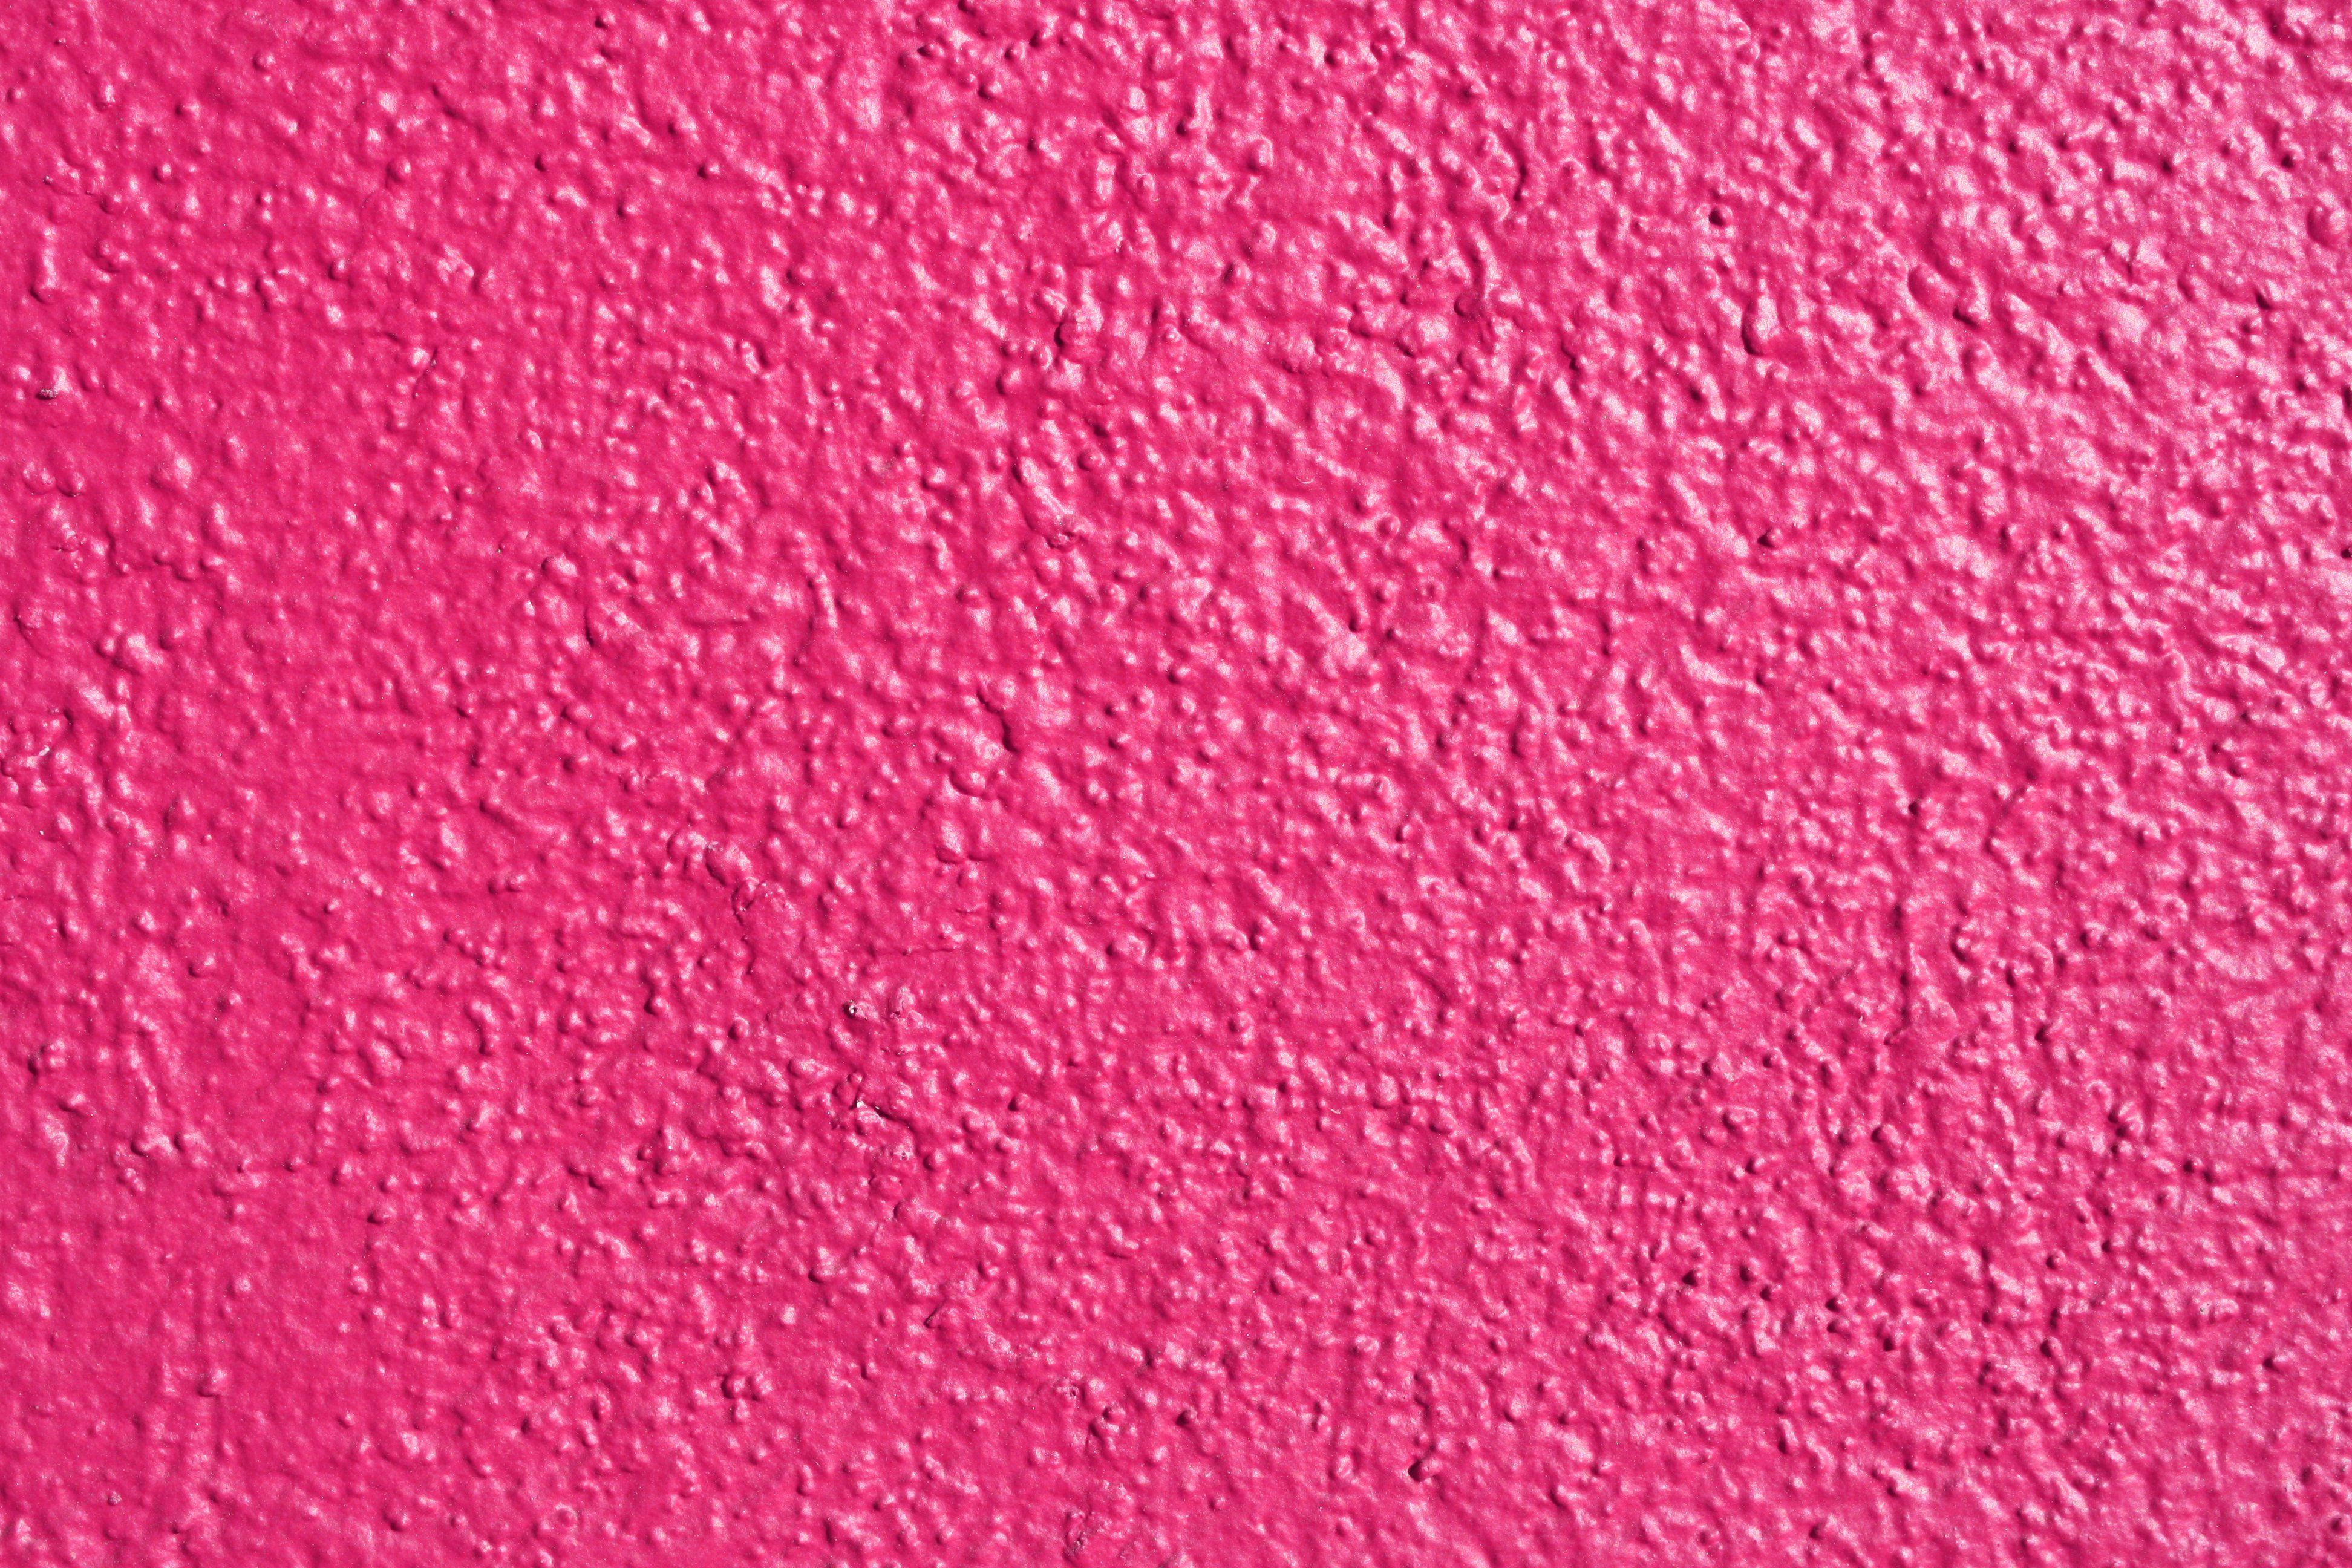 Hot Pink Painted Wall Texture Picture.